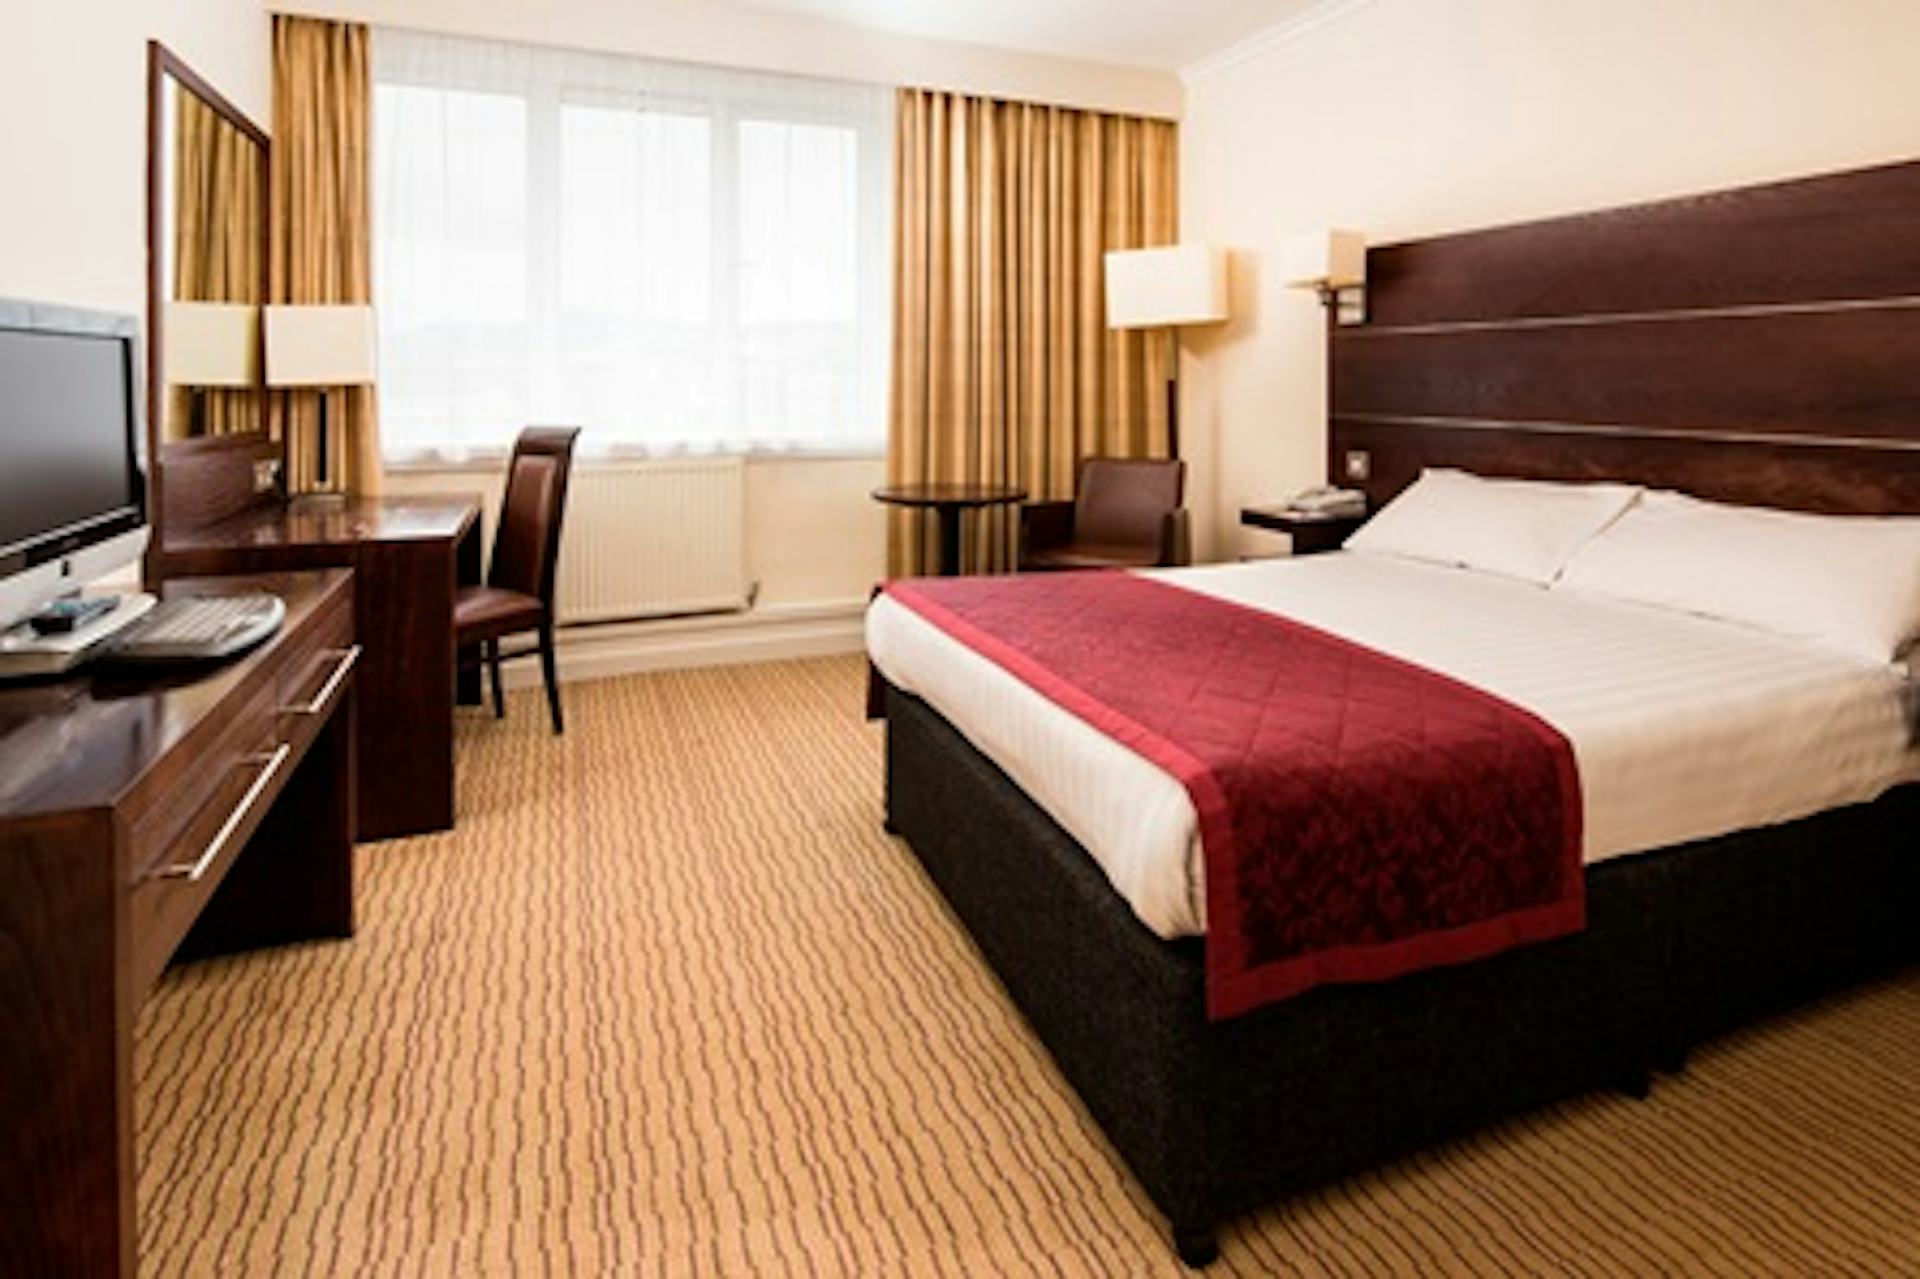 One Night Break with Dinner for Two at the Mercure Inverness Hotel